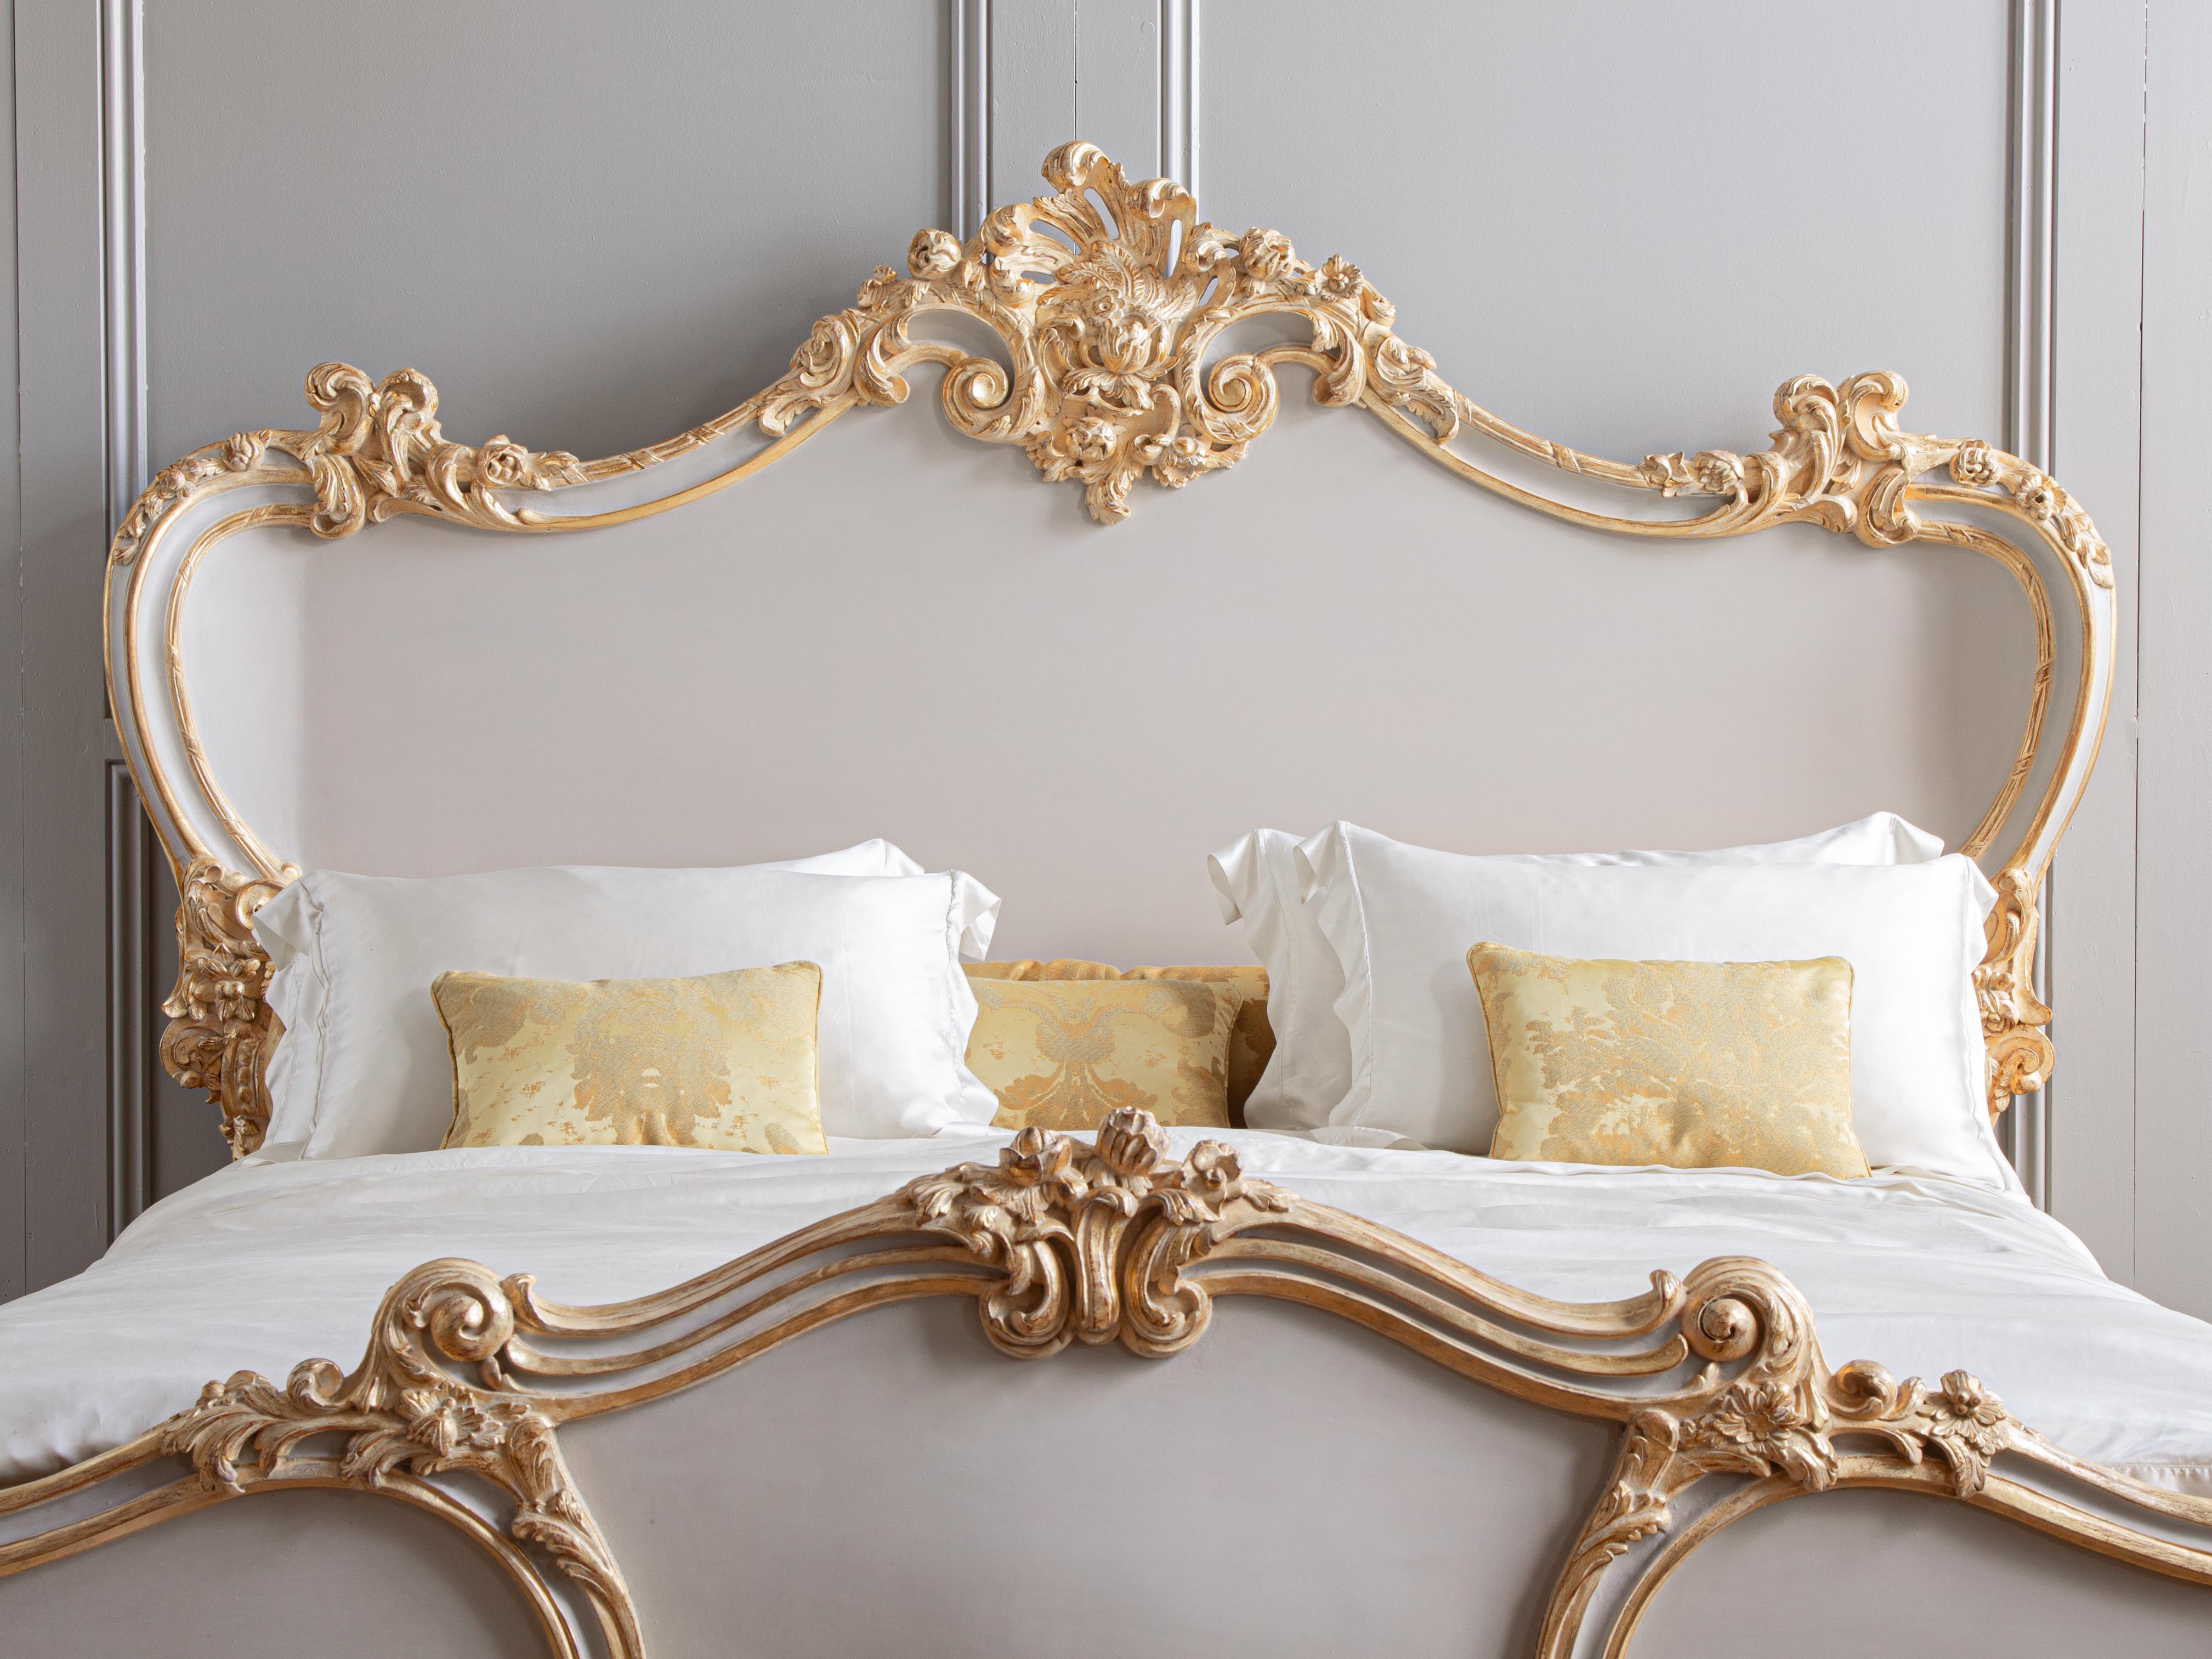 British The Cherub Bed By La Maison London With Gold Highlights - UK Super King For Sale